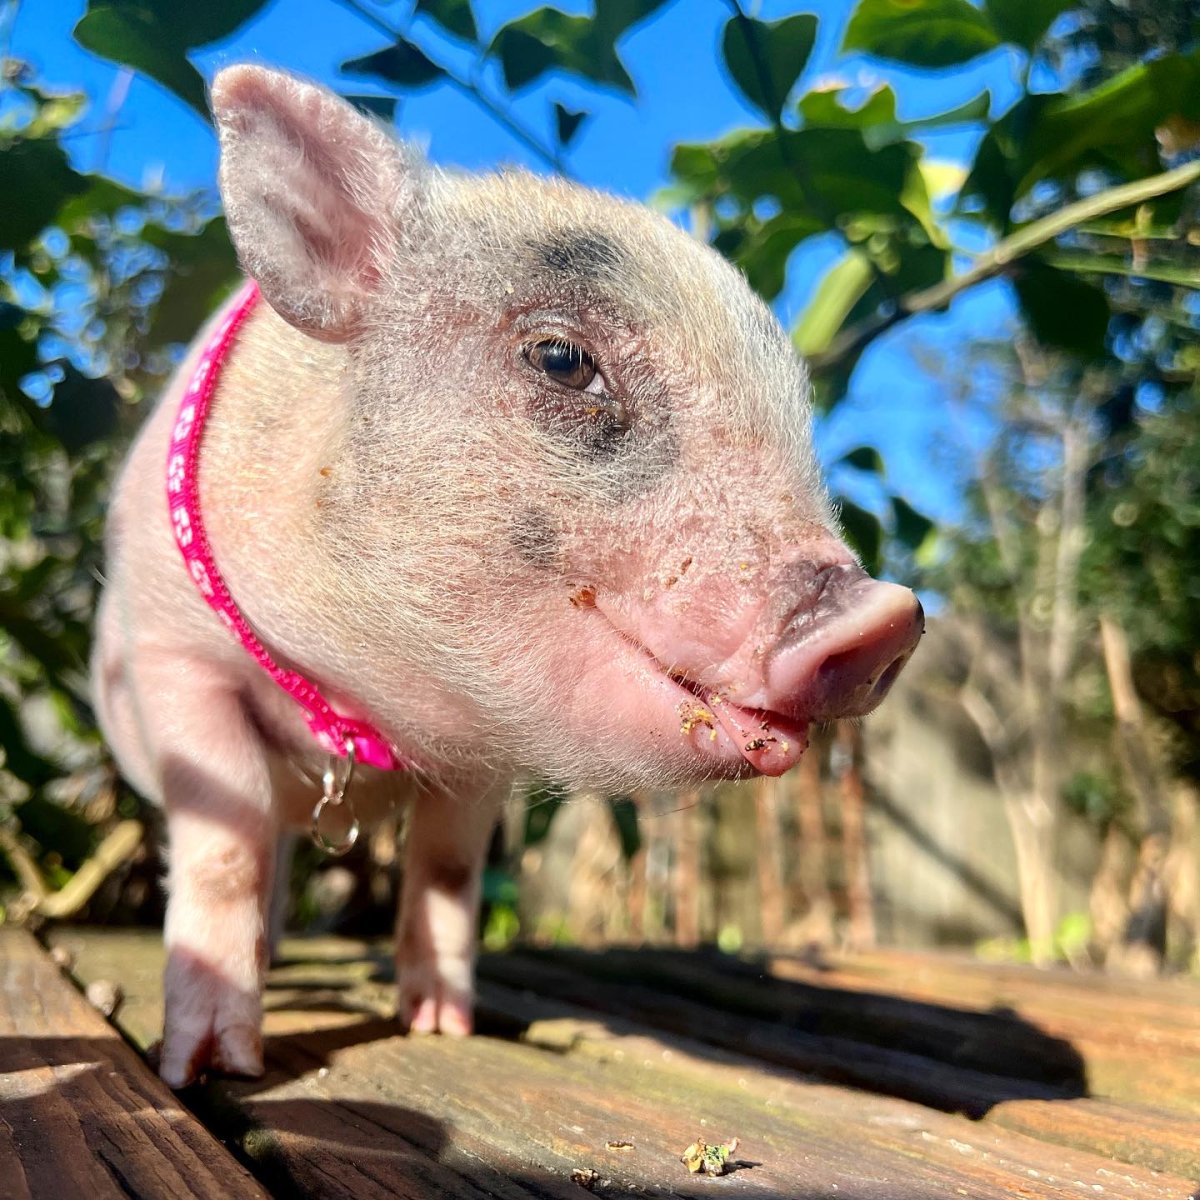 A photo of Piglet, wearing a pink collar, and appearing to smirk at the camera.